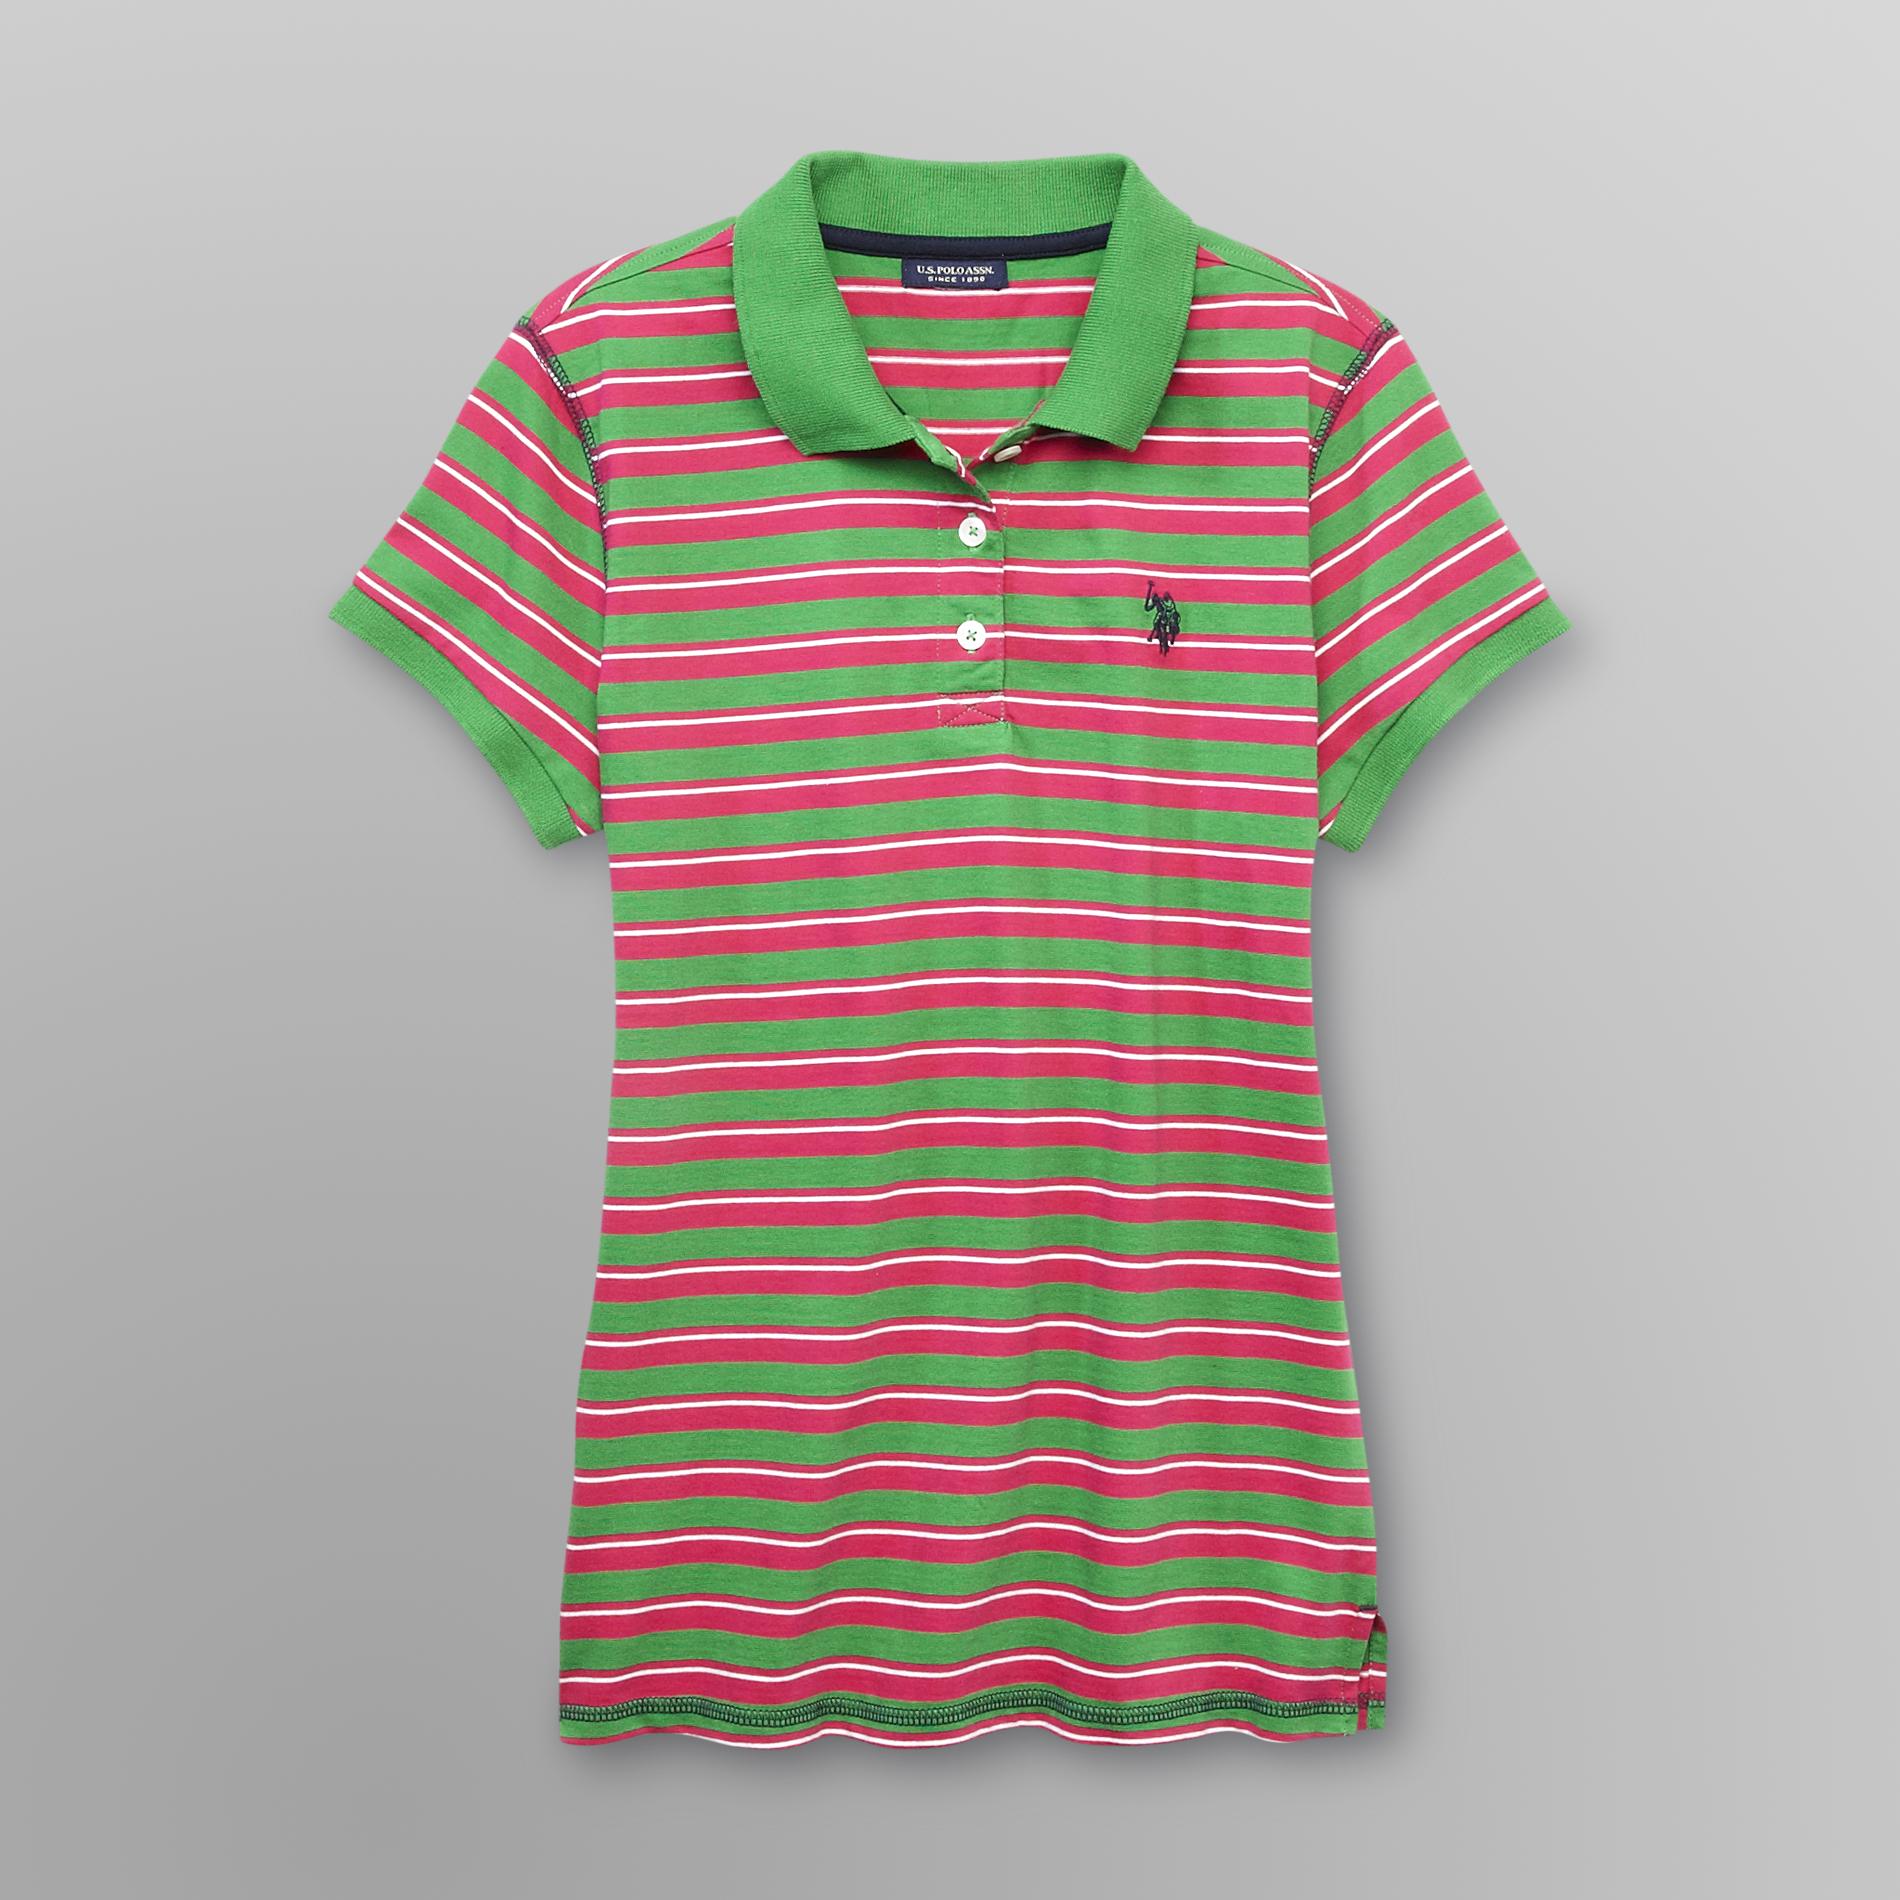 U.S. Polo Assn. Junior's Fitted Polo Shirt - Striped